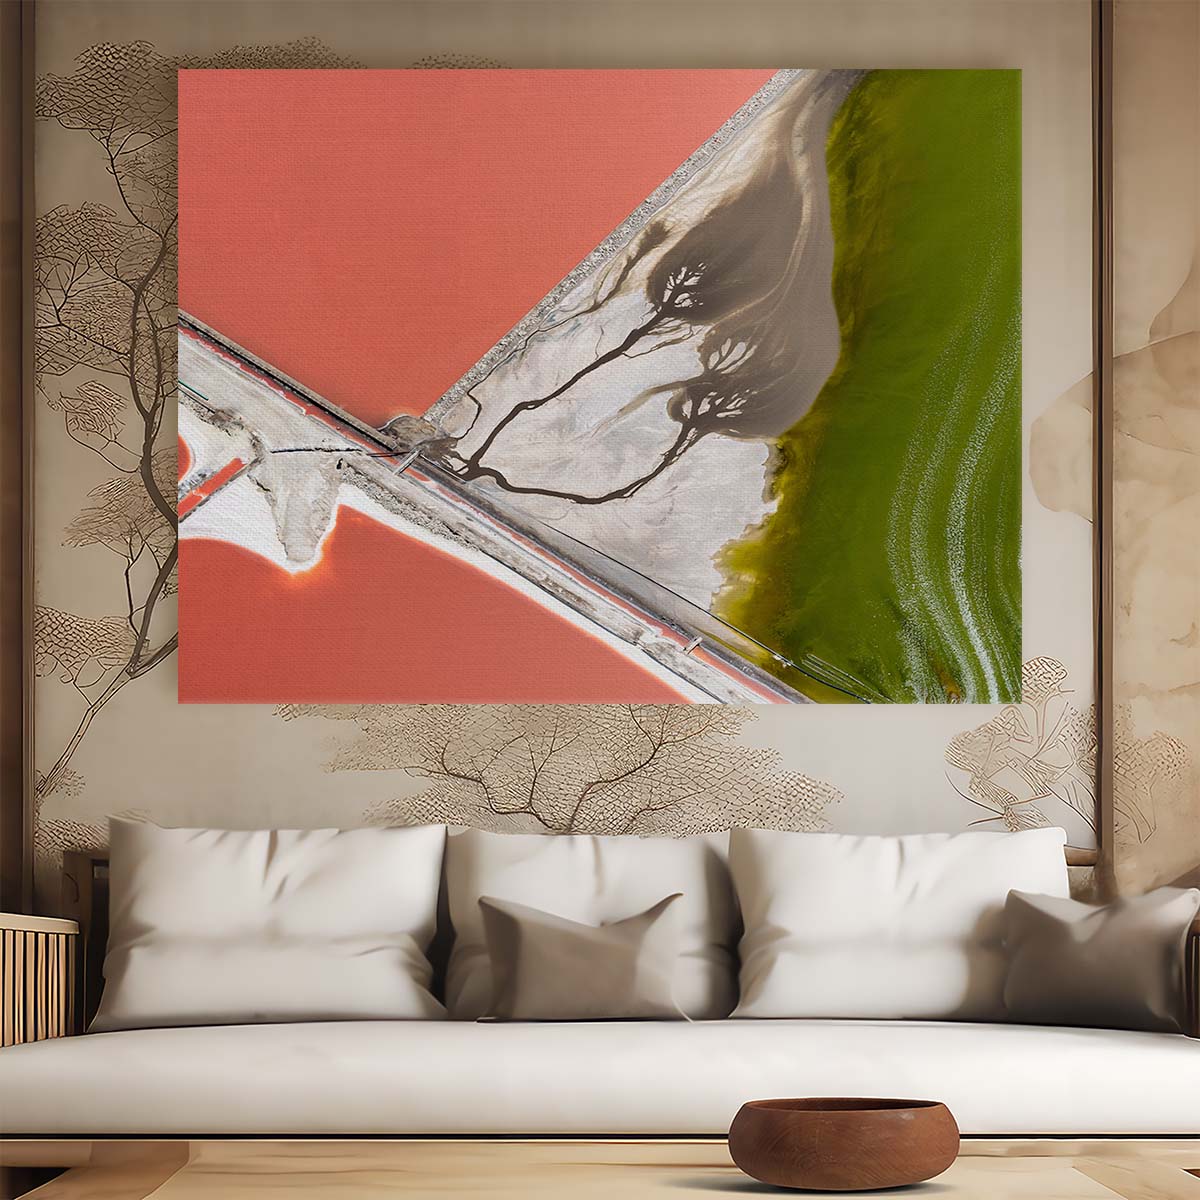 California Salt Pond Aerial Abstract Wall Art by Luxuriance Designs. Made in USA.